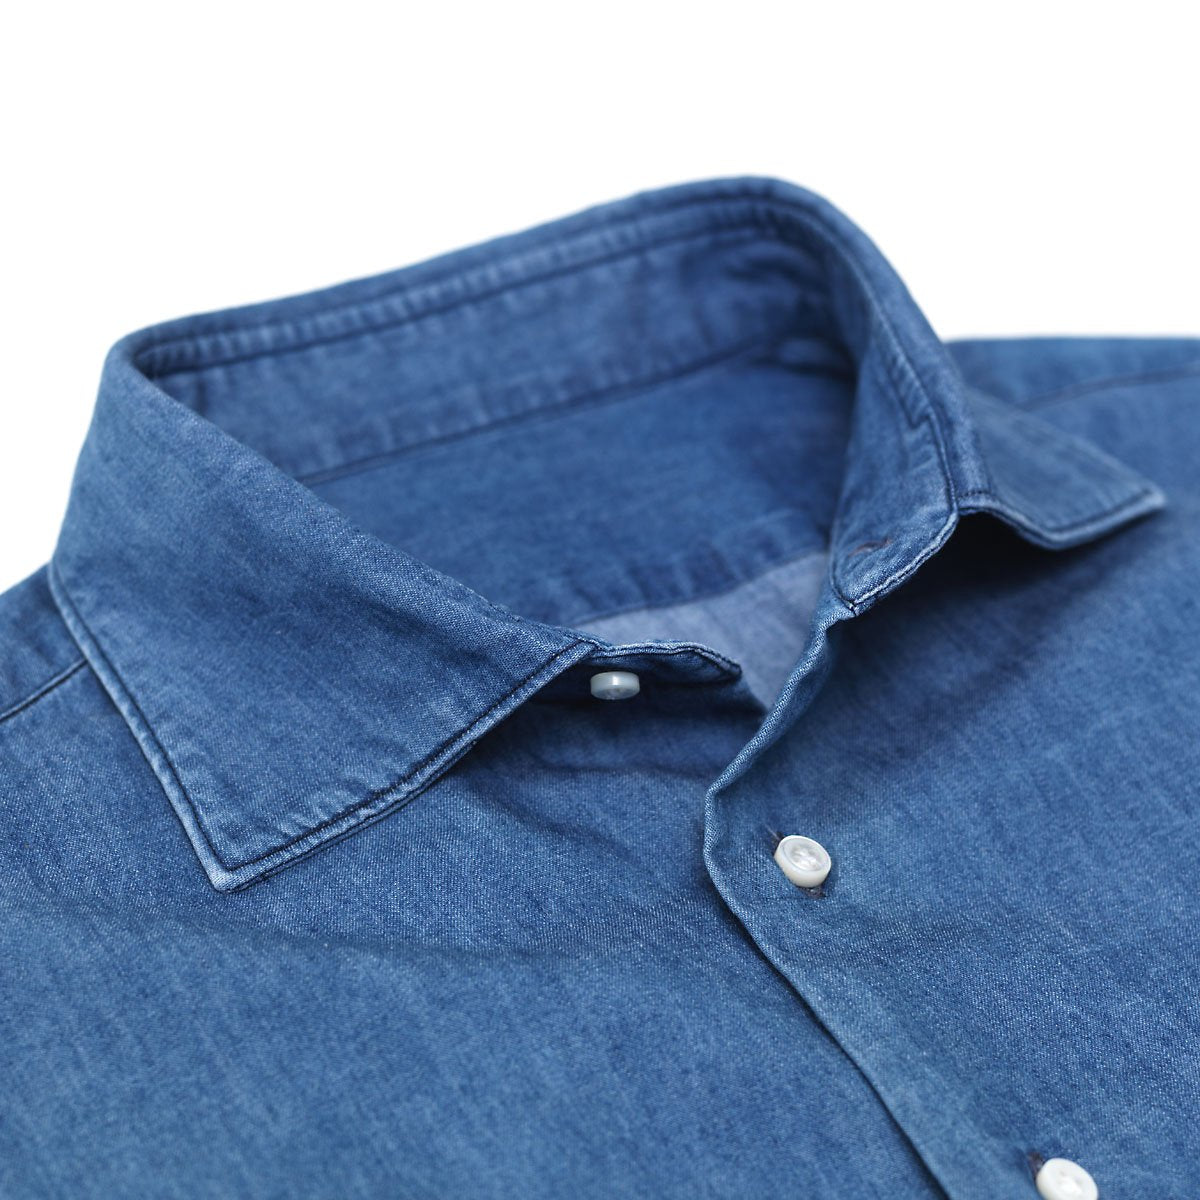 Denim shirt - how to find the right one?